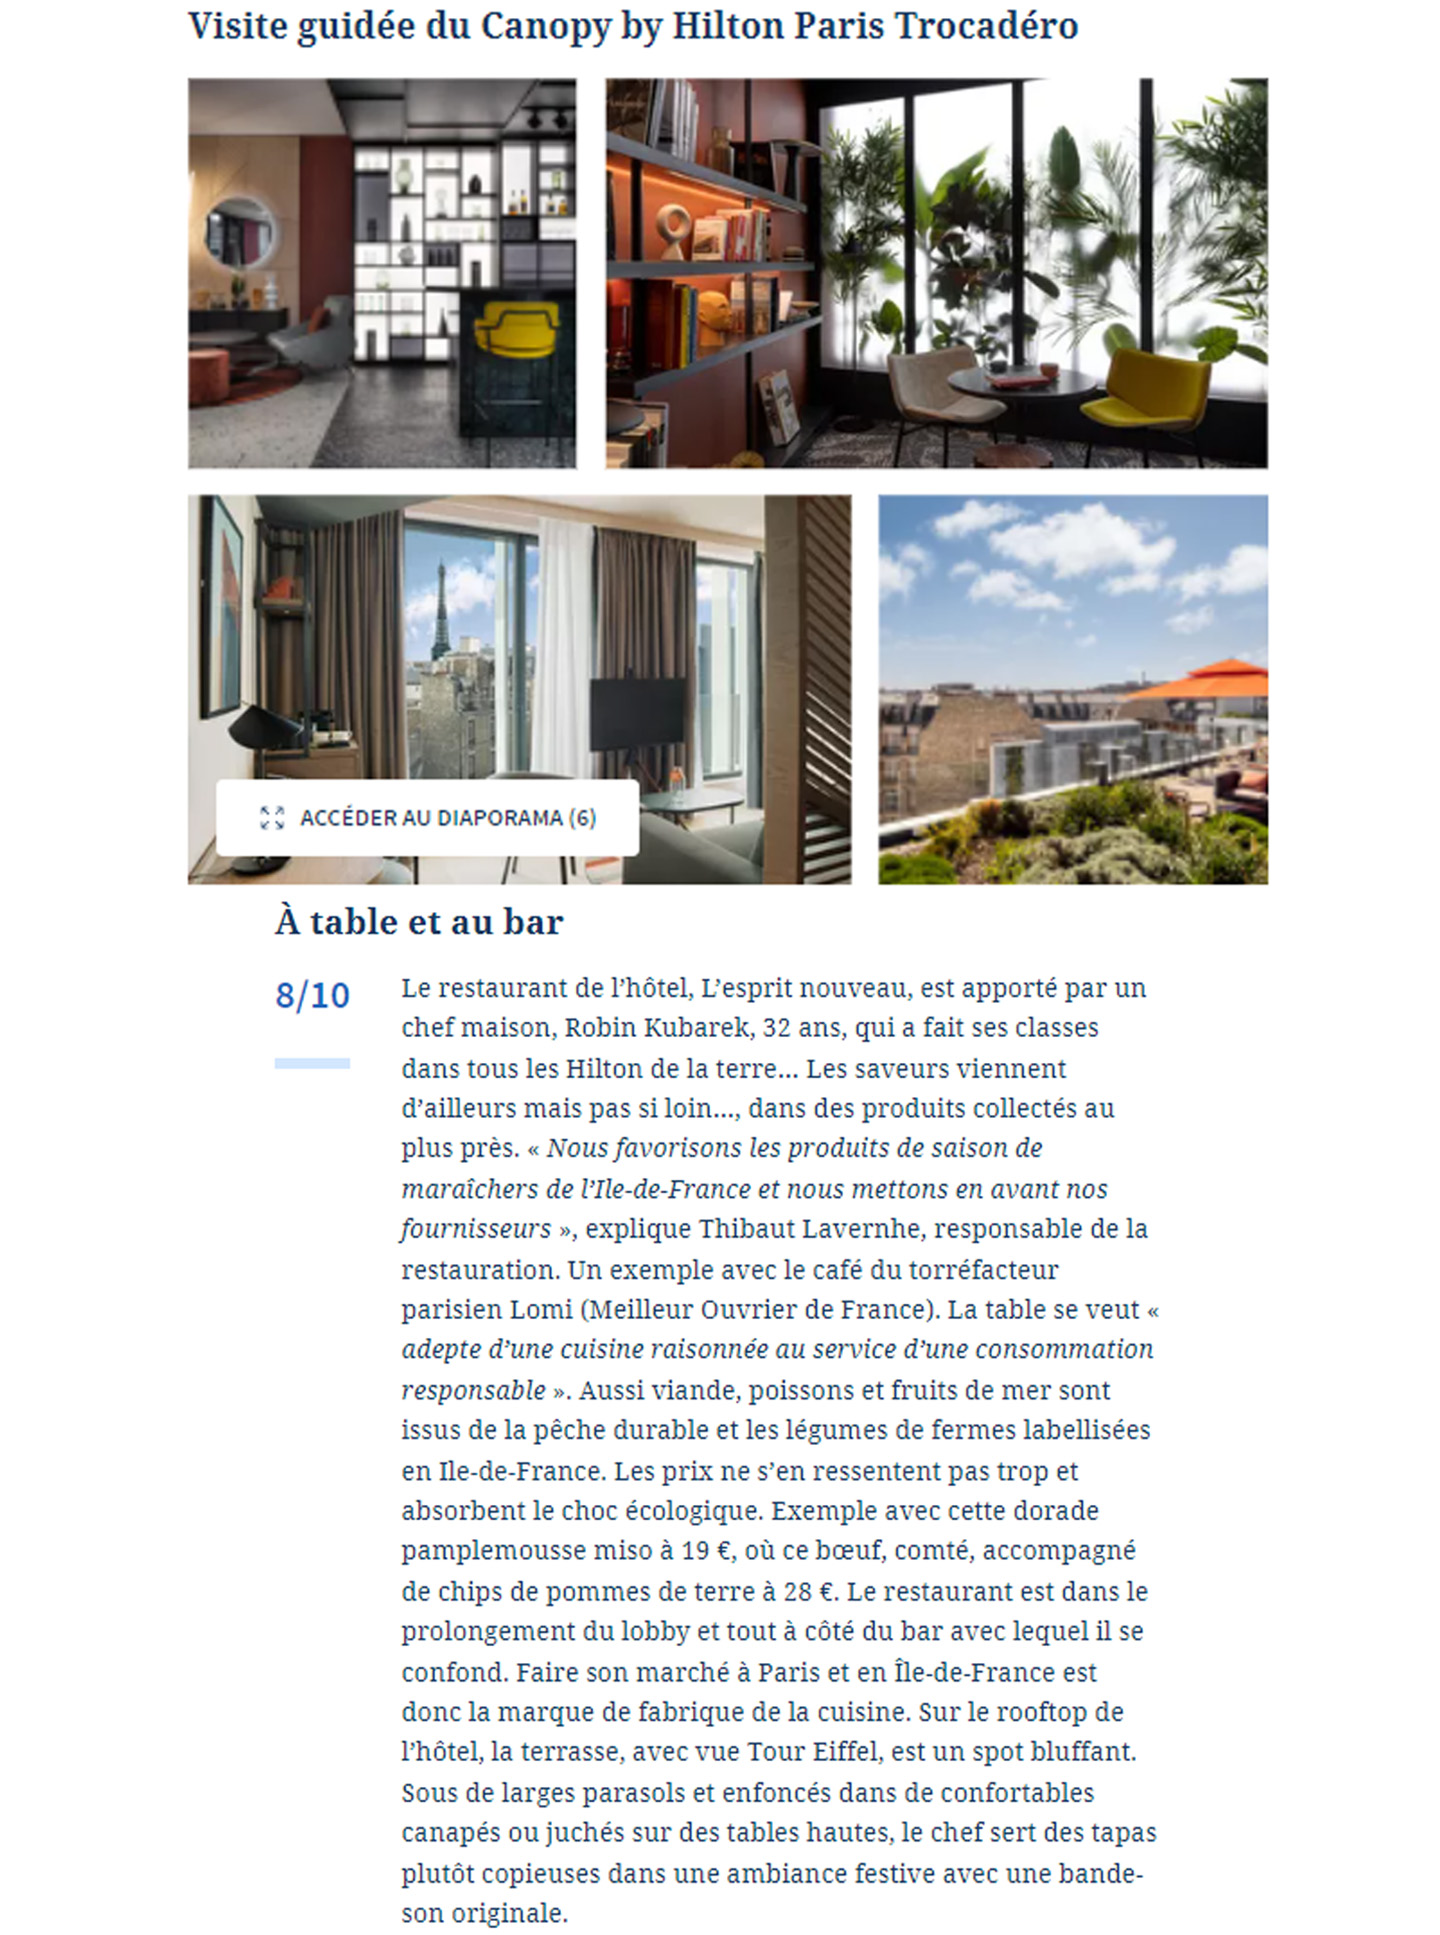 Article on the Canopy by Hilton Paris Trocadero designed by jean-Philippe Nuel studio in Le Figaro magazine, new lifestyle hotel, luxury interior design, paris center, french luxury hotel